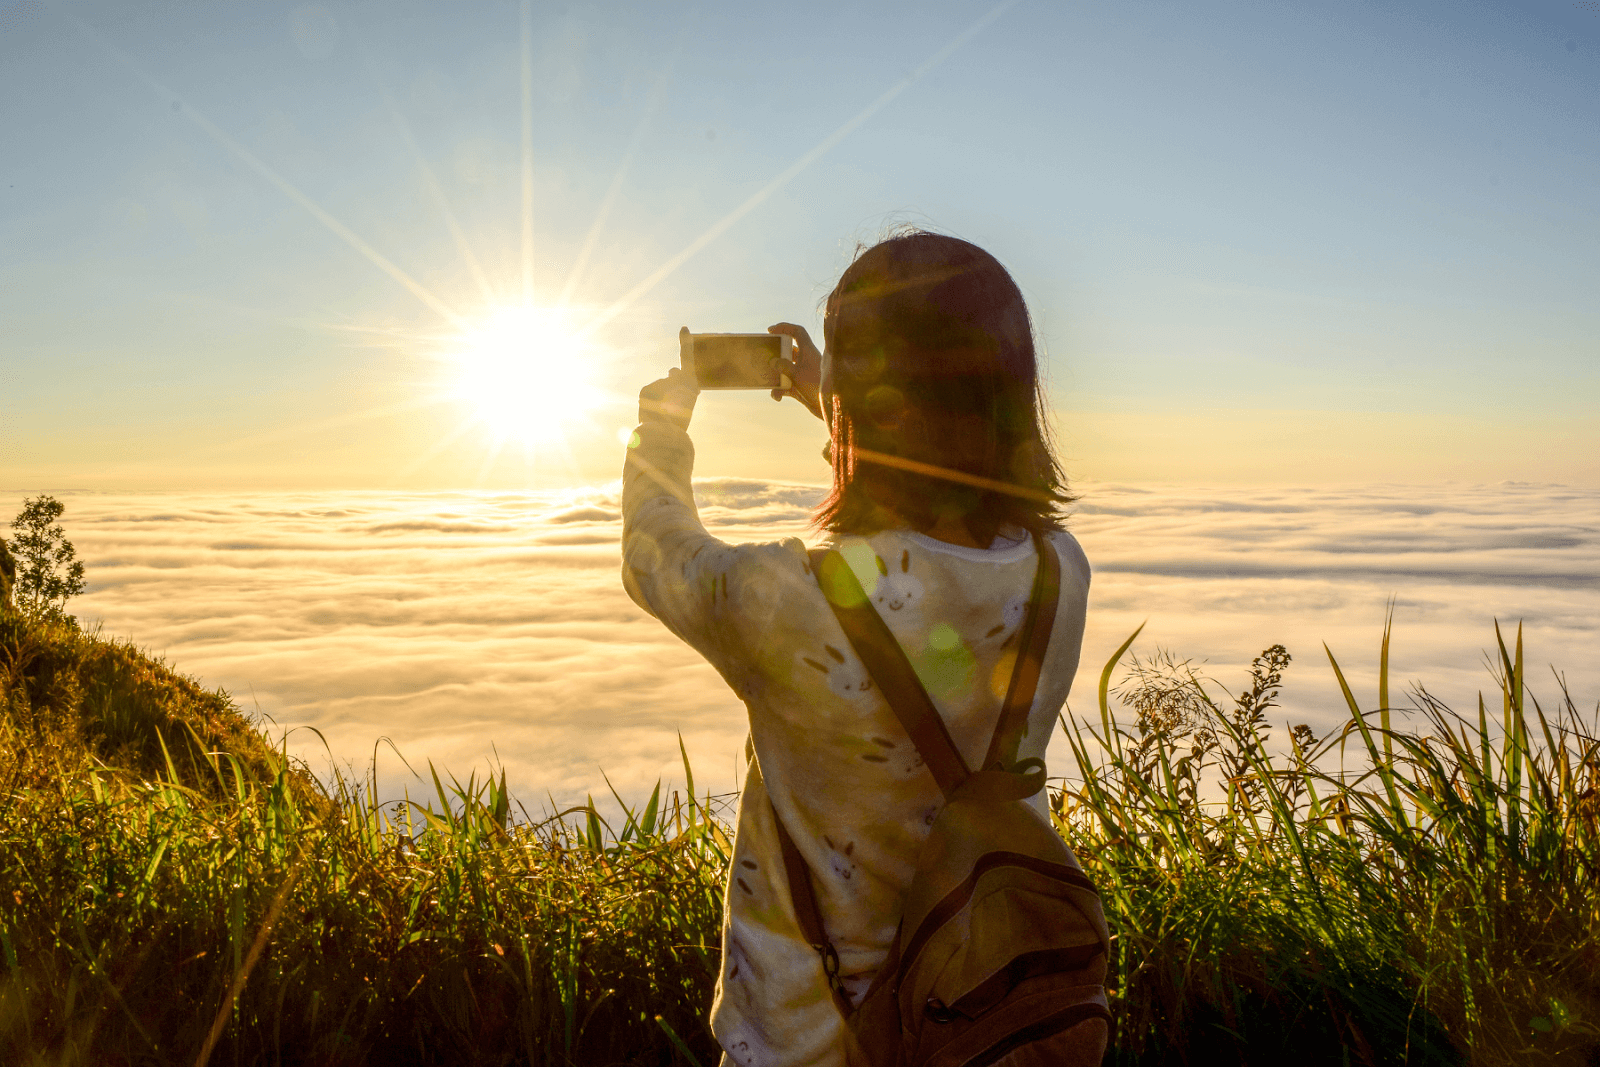 The photo displays a woman taking a photo of a sunset high above the clouds. She is surrounded by green grass on a hilltop as the sun plunges beneath the scattered clouds.